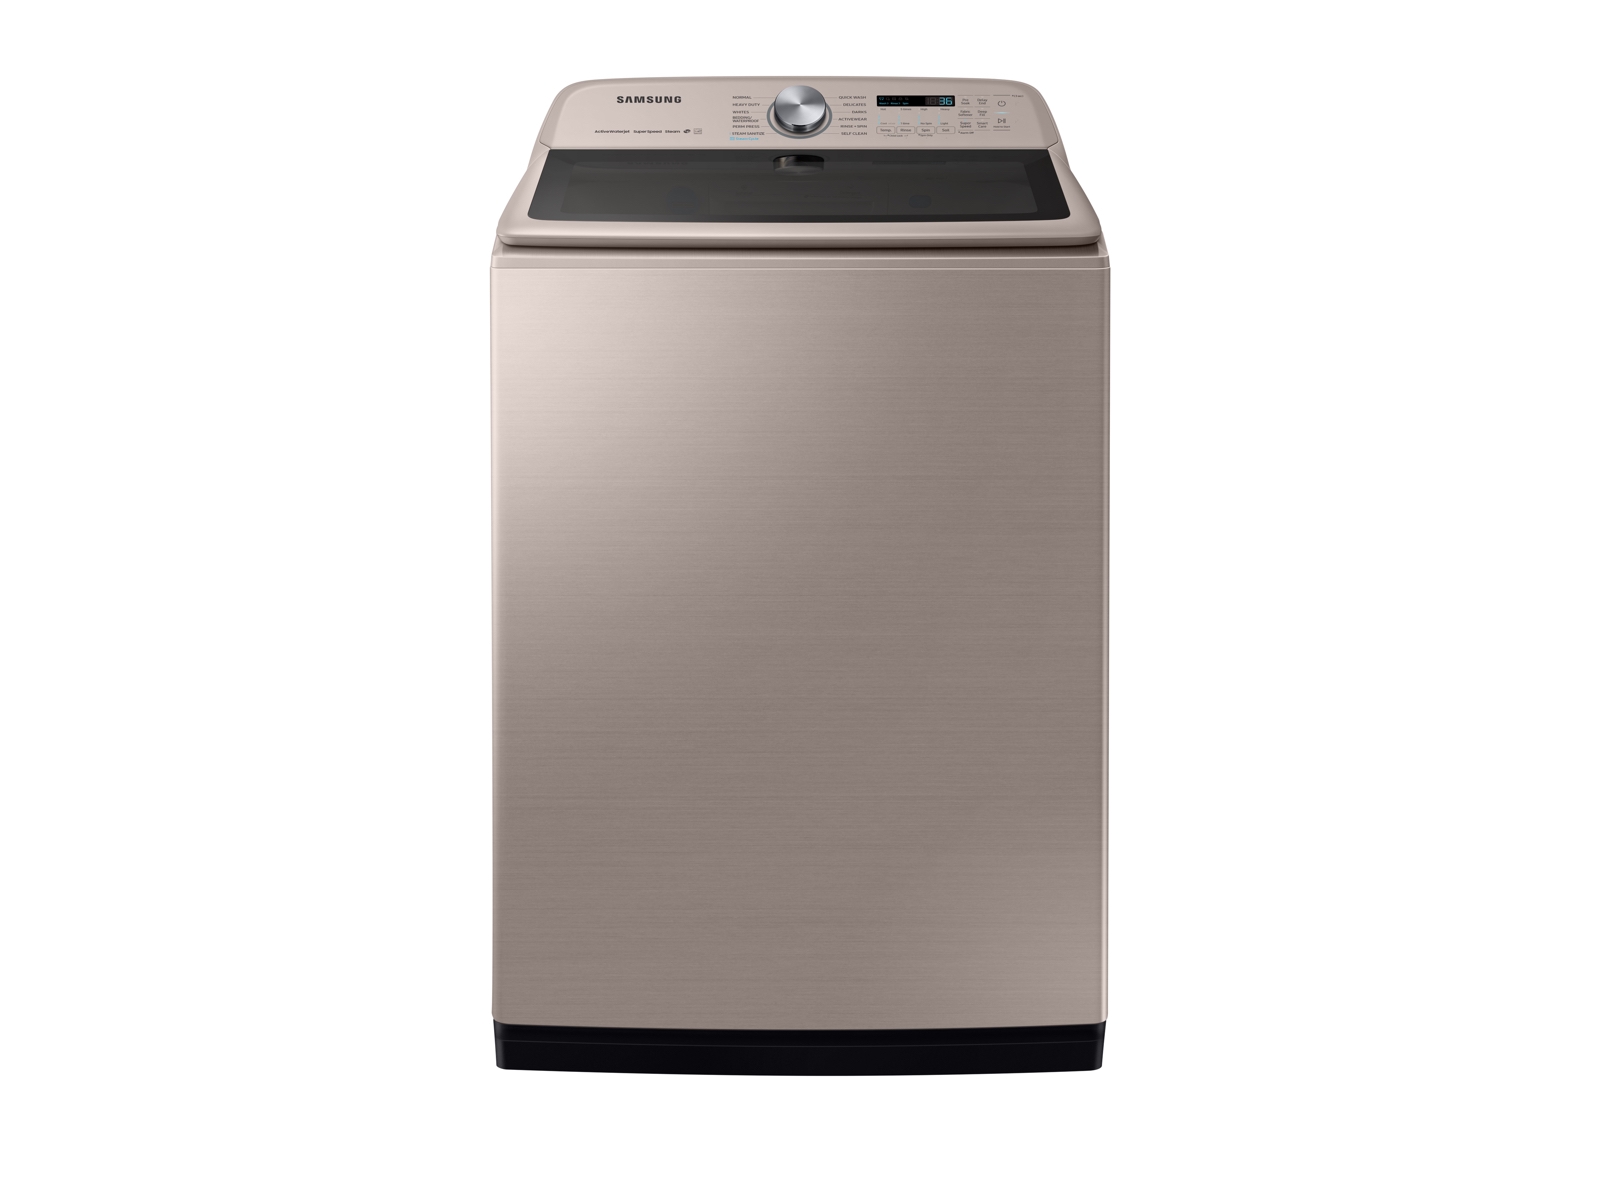 Photos - Washing Machine Samsung 5.4 cu. ft. Top Load Washer with Super Speed in Champagne(WA54R760 